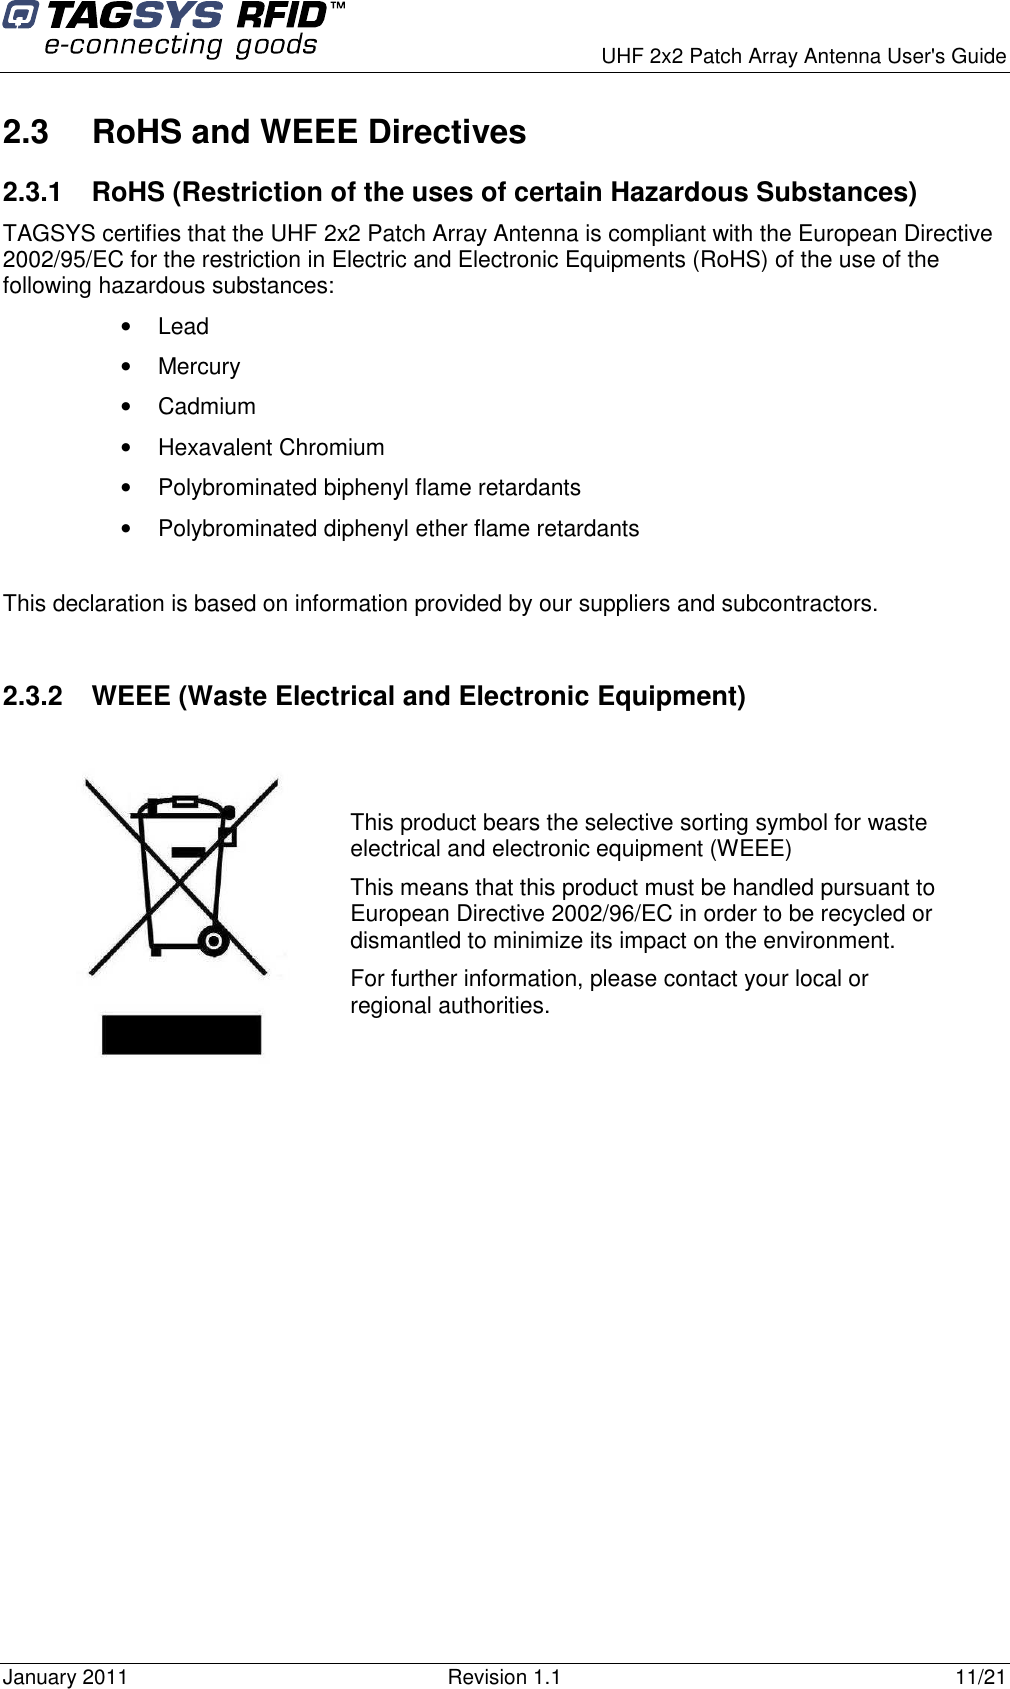      UHF 2x2 Patch Array Antenna User&apos;s Guide January 2011  Revision 1.1  11/21 2.3  RoHS and WEEE Directives 2.3.1  RoHS (Restriction of the uses of certain Hazardous Substances) TAGSYS certifies that the UHF 2x2 Patch Array Antenna is compliant with the European Directive 2002/95/EC for the restriction in Electric and Electronic Equipments (RoHS) of the use of the following hazardous substances: •  Lead •  Mercury •  Cadmium •  Hexavalent Chromium •  Polybrominated biphenyl flame retardants •  Polybrominated diphenyl ether flame retardants  This declaration is based on information provided by our suppliers and subcontractors.  2.3.2  WEEE (Waste Electrical and Electronic Equipment)     This product bears the selective sorting symbol for waste electrical and electronic equipment (WEEE) This means that this product must be handled pursuant to European Directive 2002/96/EC in order to be recycled or dismantled to minimize its impact on the environment. For further information, please contact your local or regional authorities. 